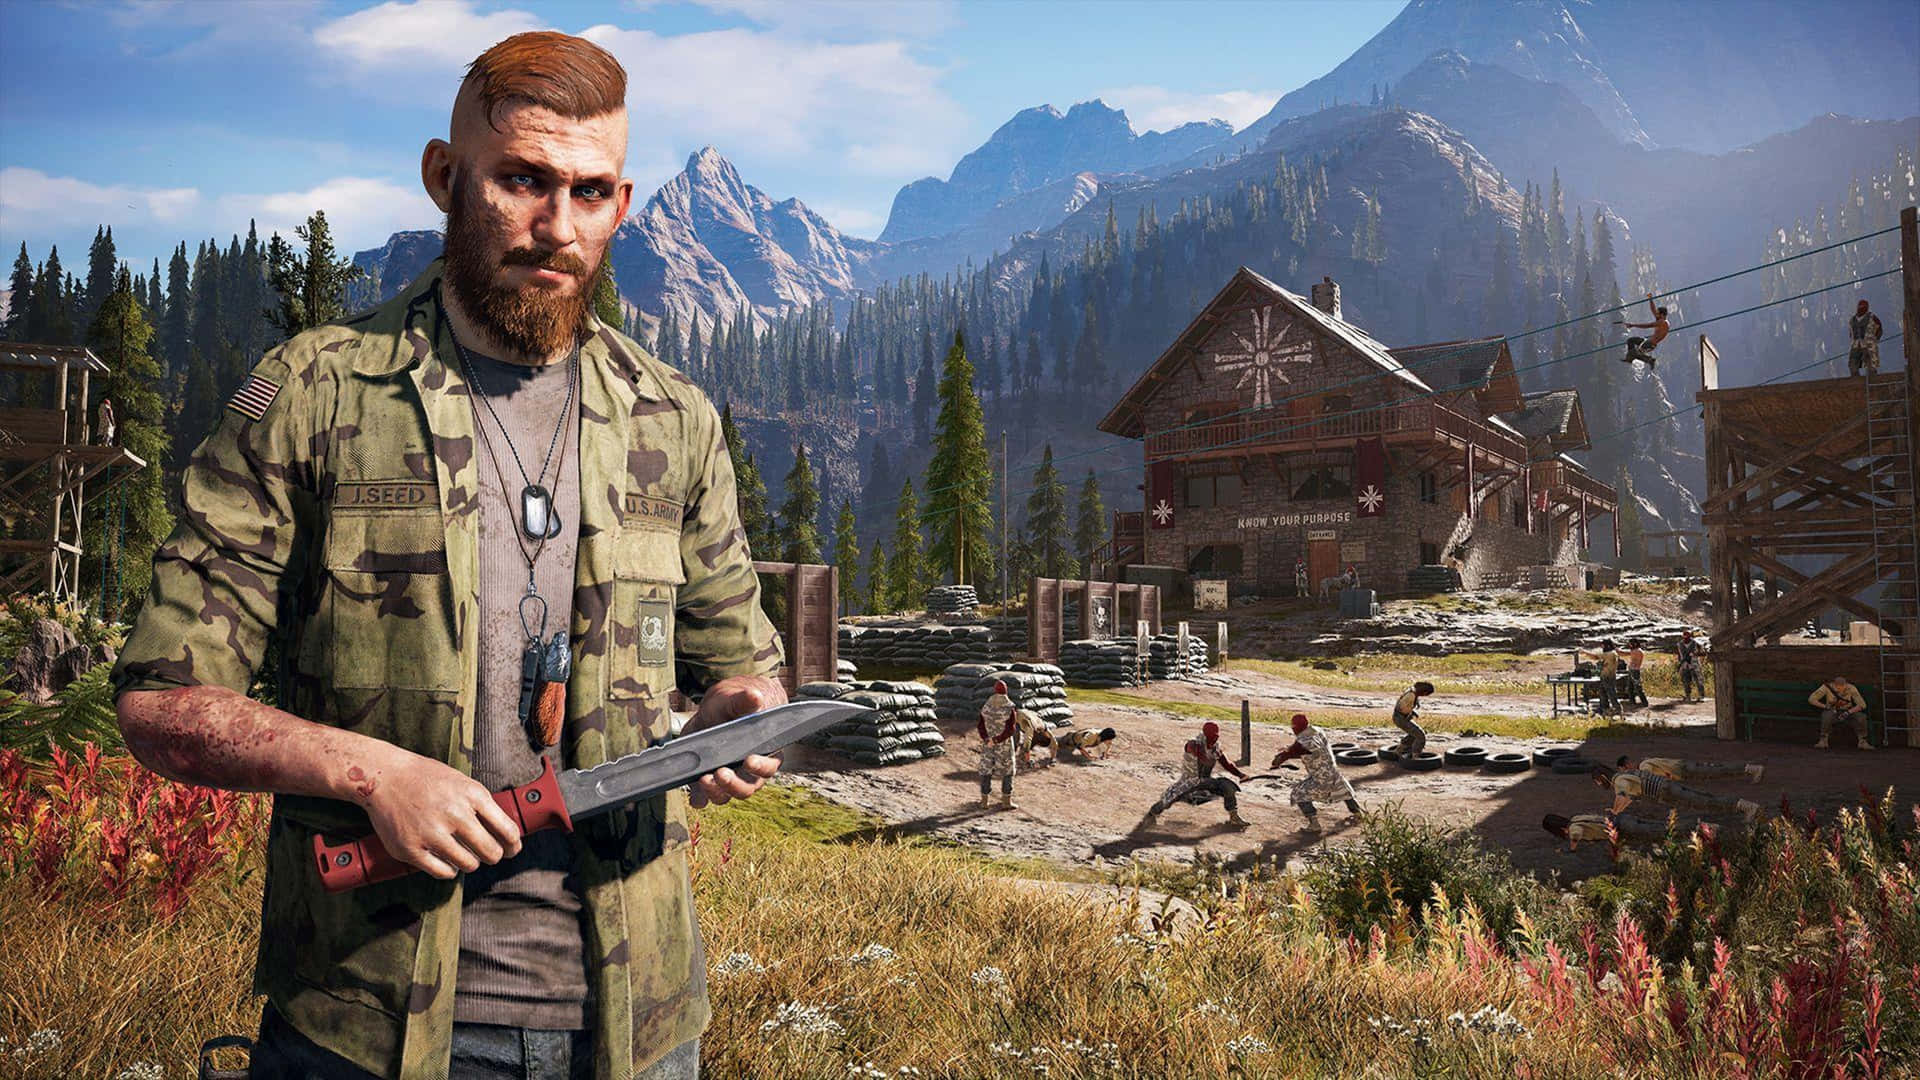 Experience a new level of immersion in Far Cry 5 with 4K Ultra HD Wallpaper